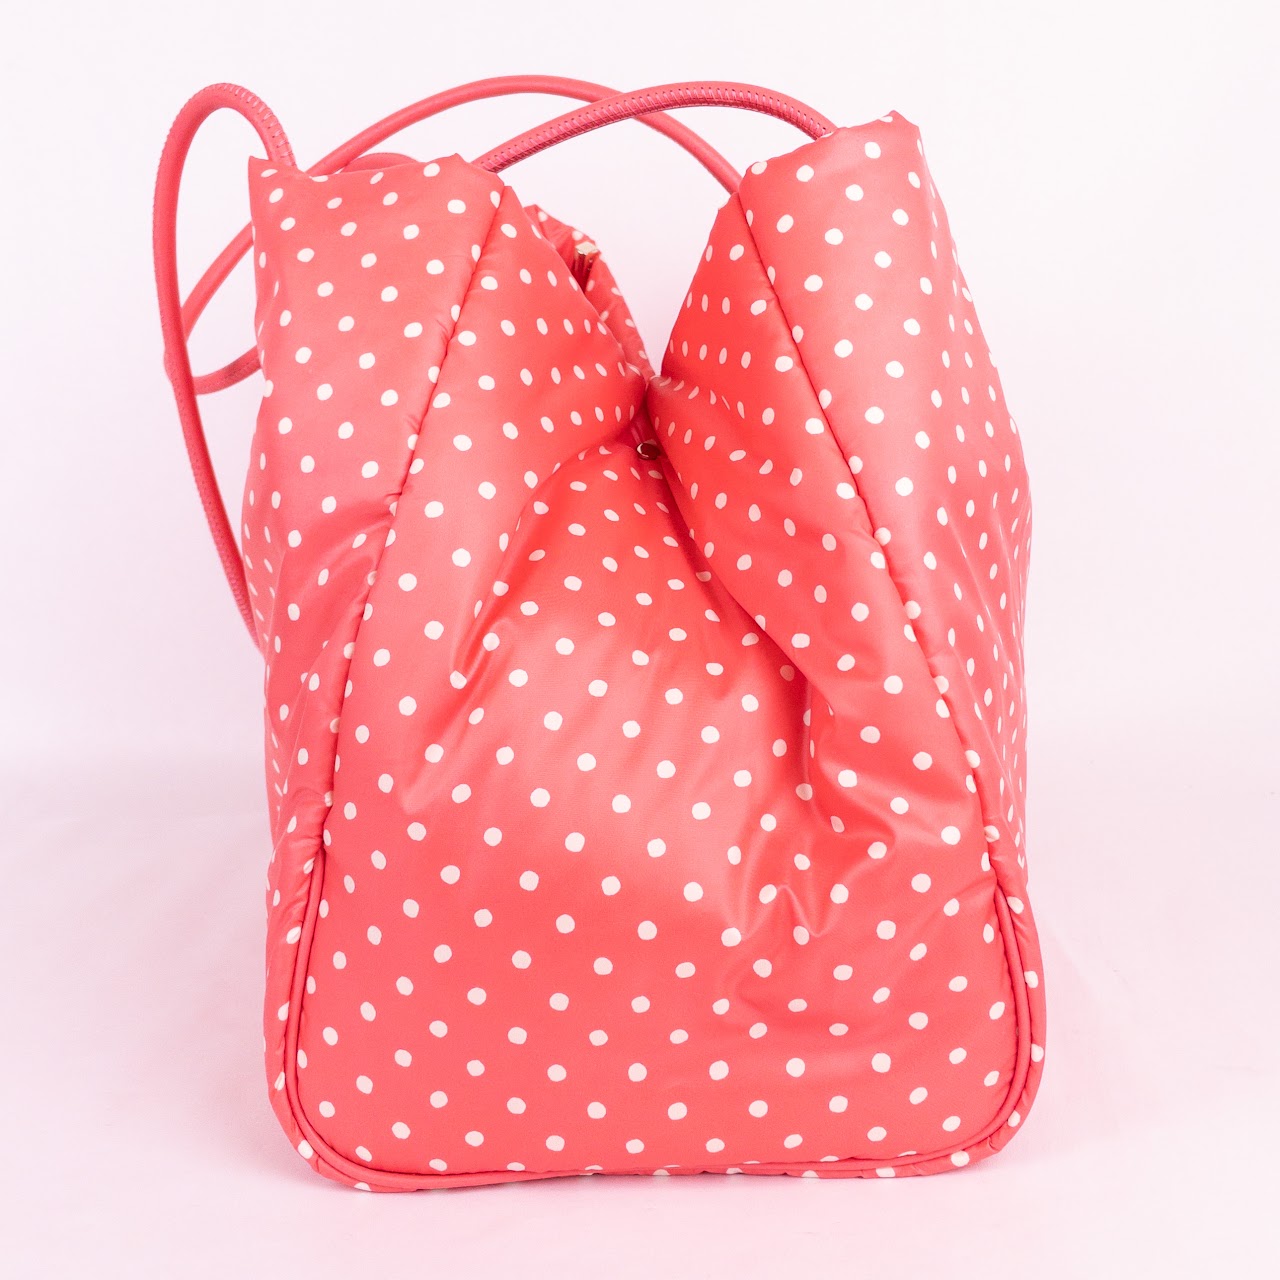 Kate Spade Quilted Polka Dot Tote